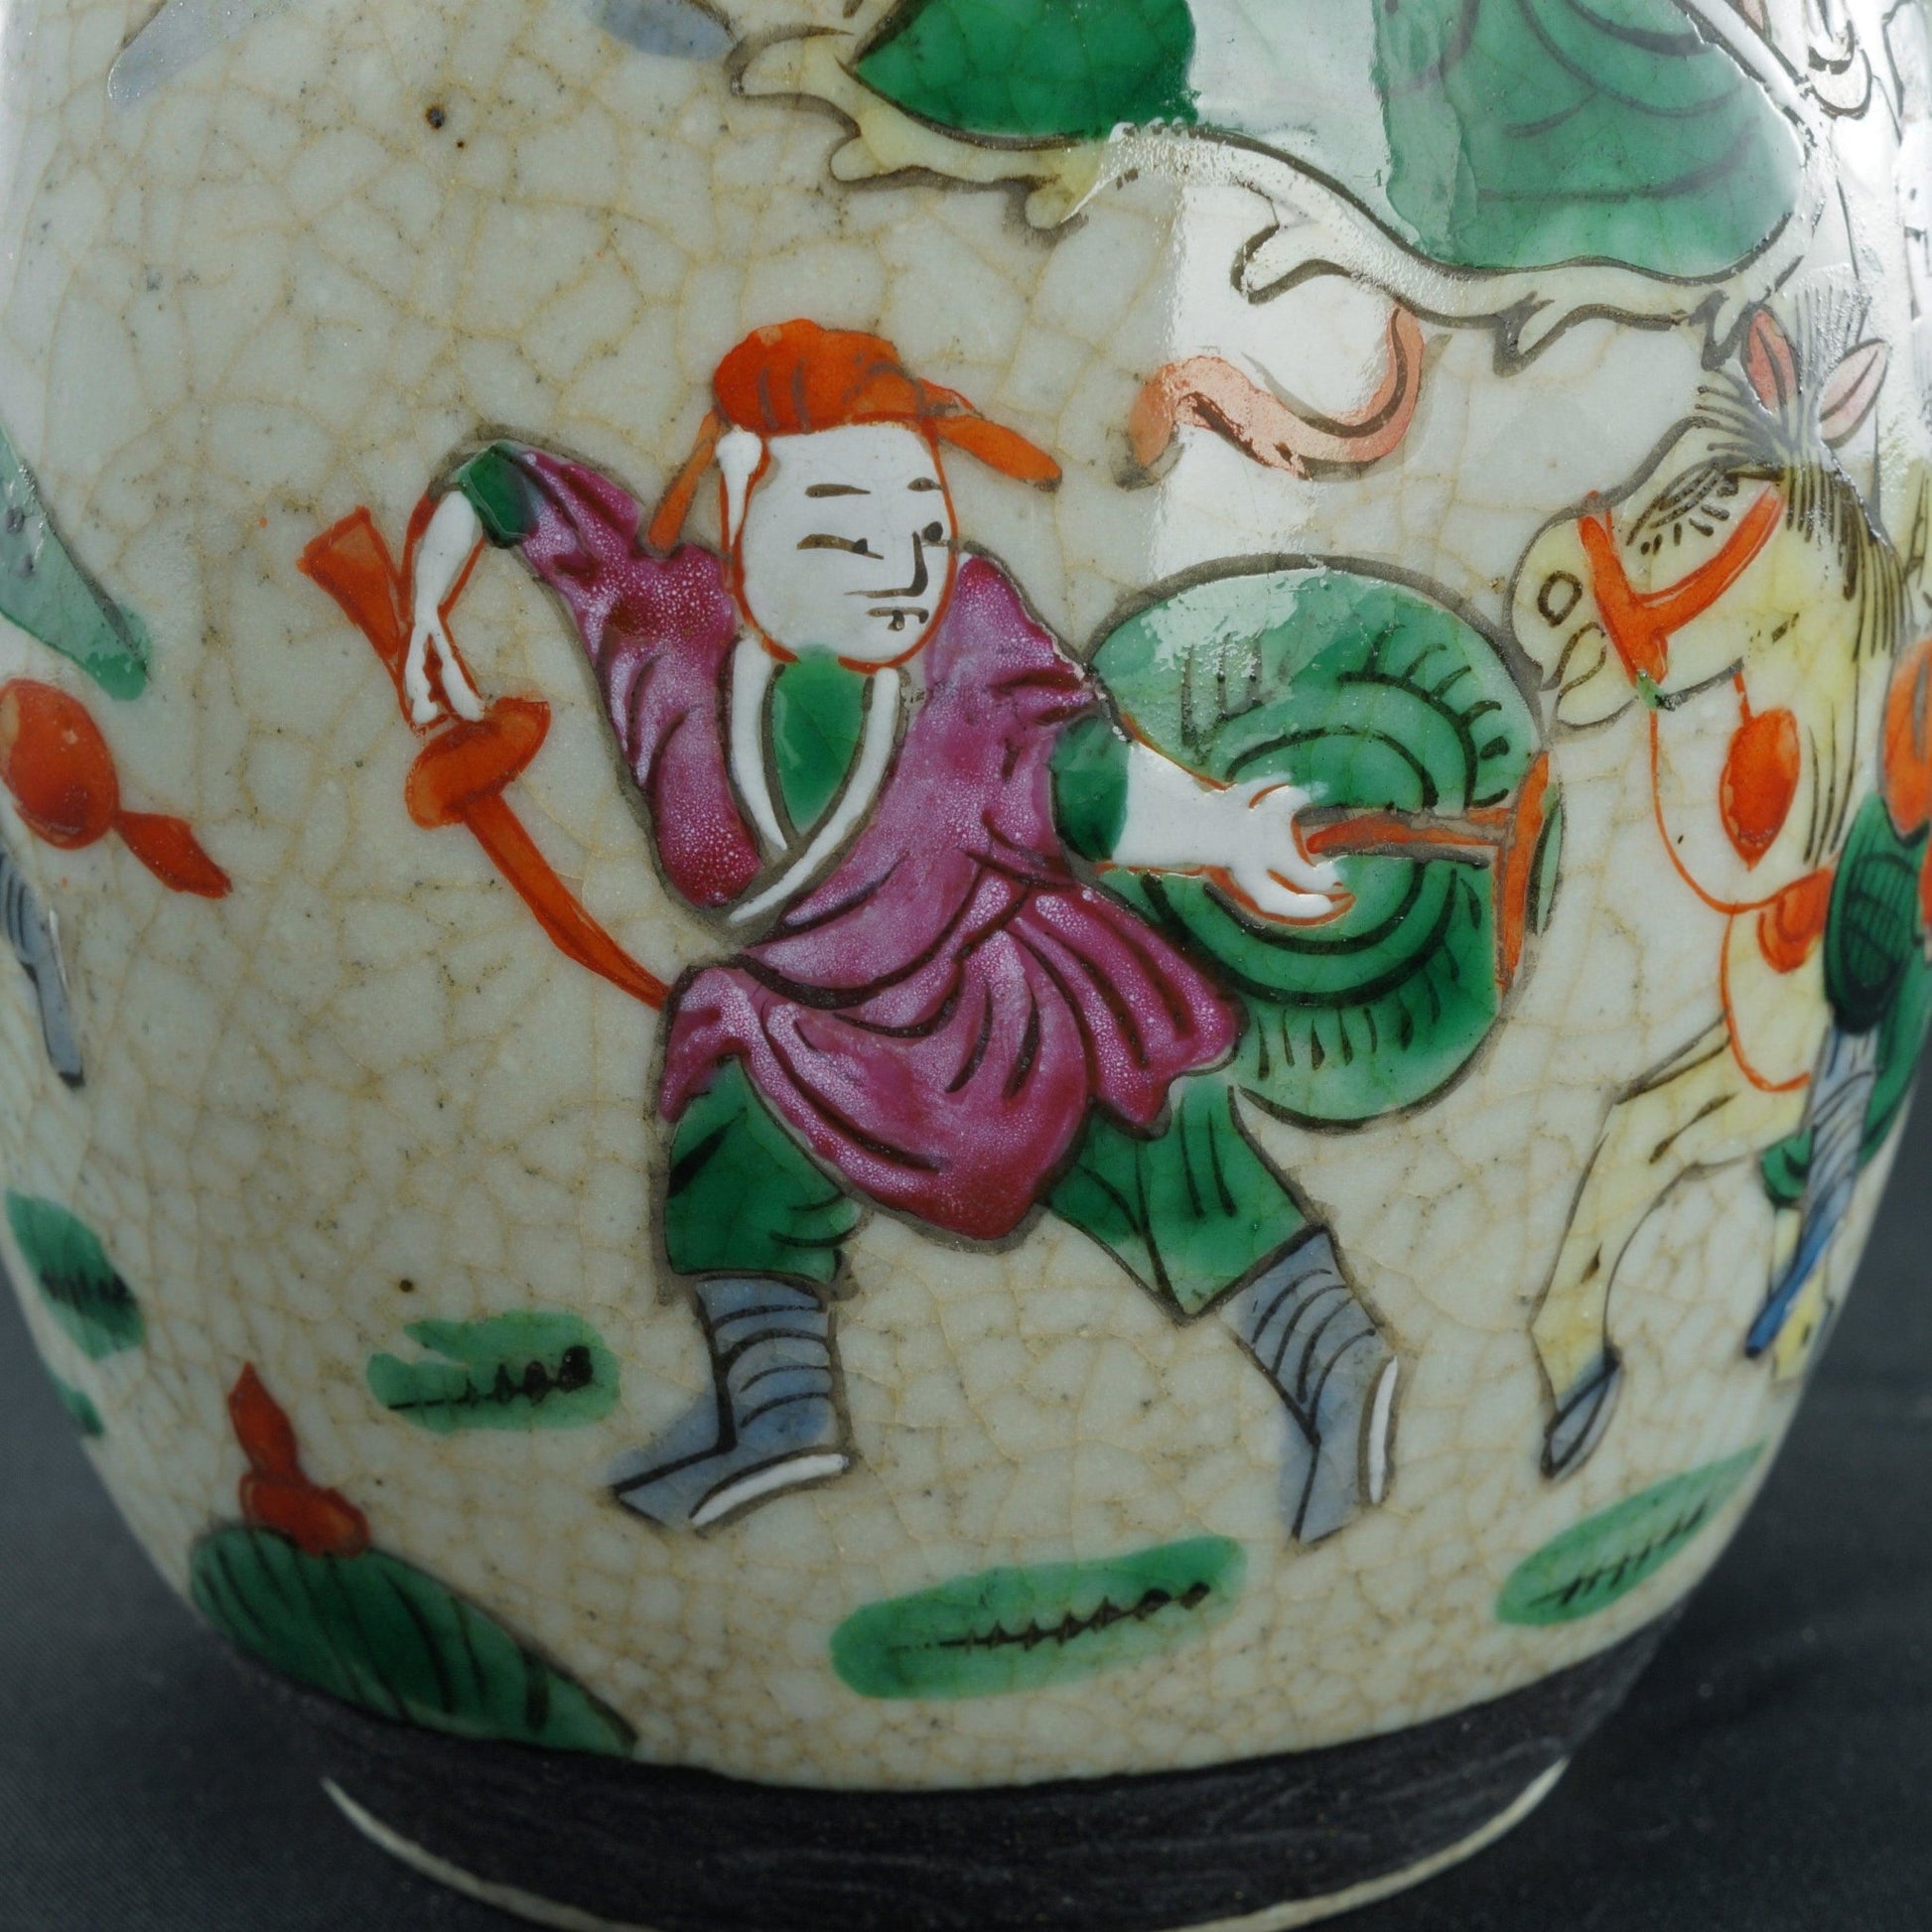 Chinese Crackle Polychrome Oatmeal Ginger Jar with Warriors Republic Period - Bear and Raven Antiques